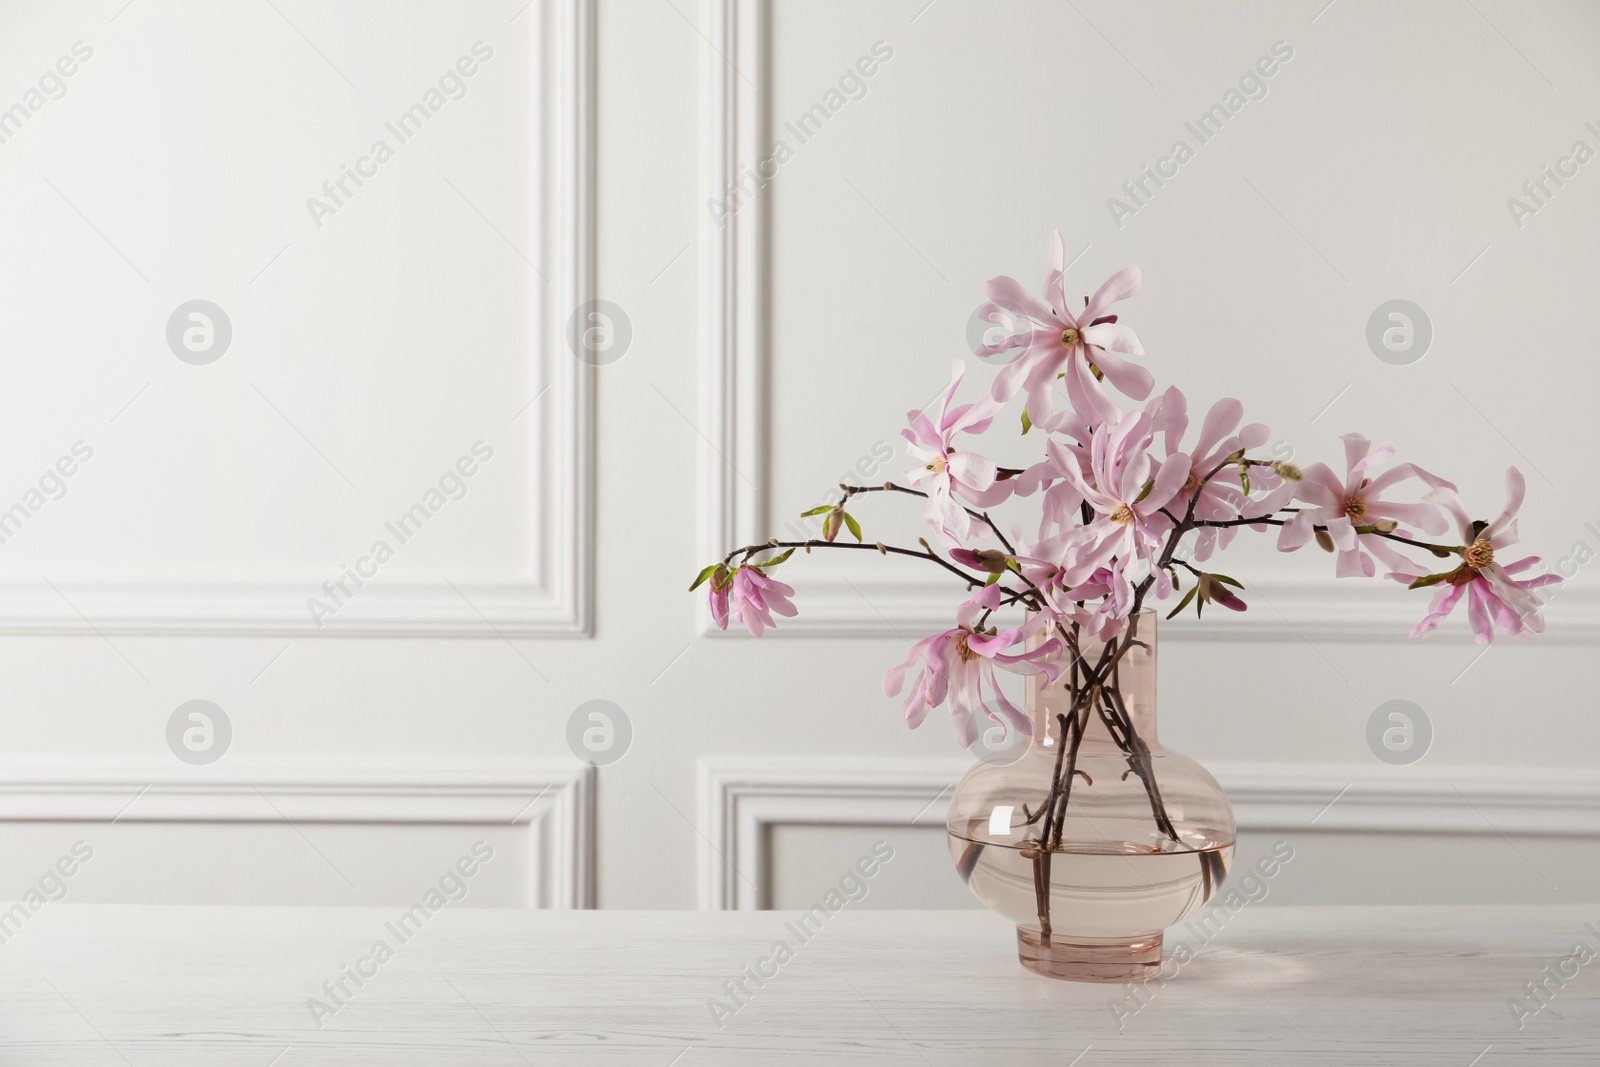 Photo of Magnolia tree branches with beautiful flowers in glass vase on white wooden table, space for text